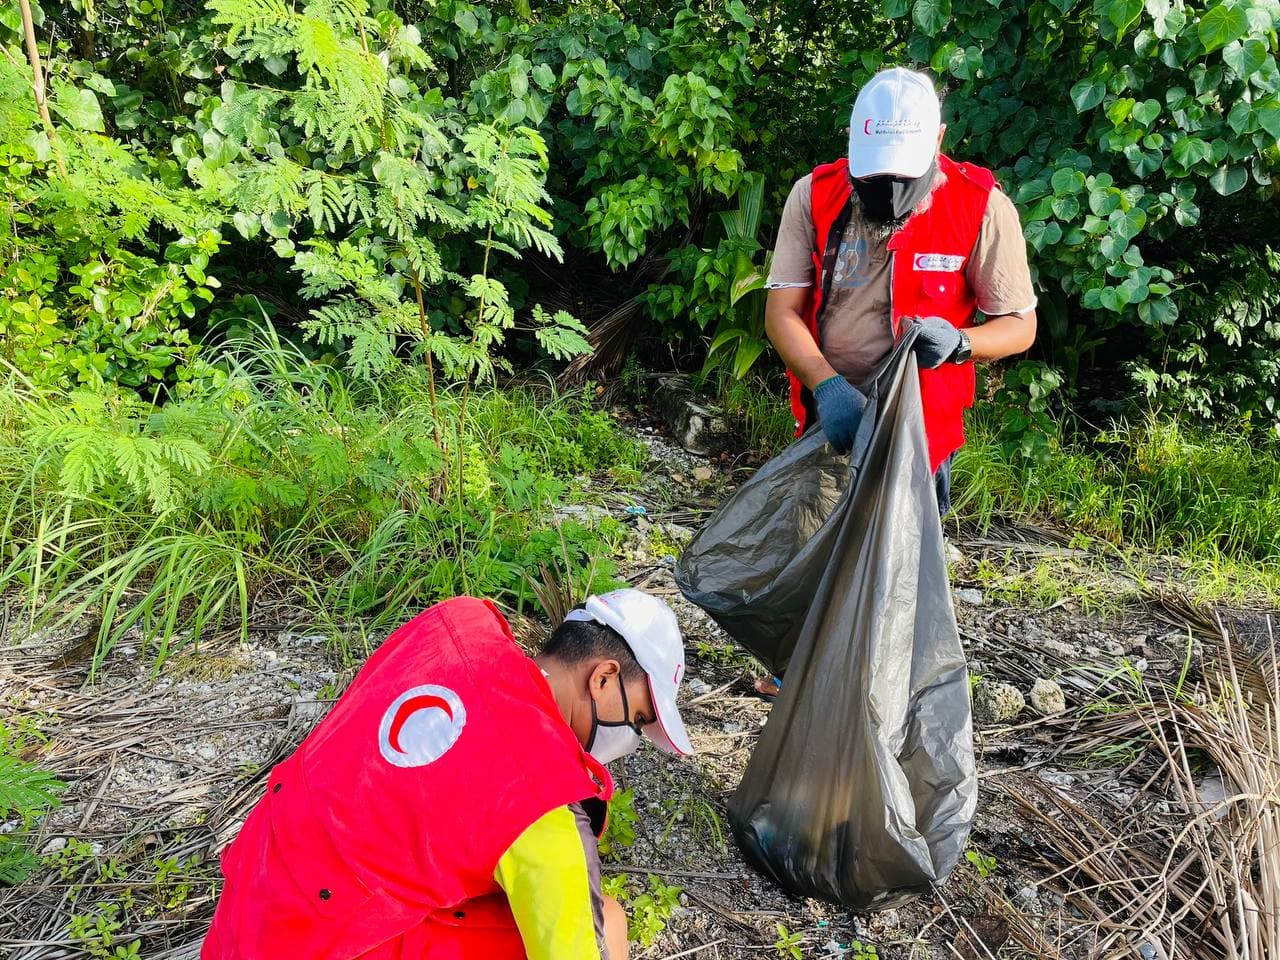 Volunteers in Kulhudhuffushi City continue to work towards protecting mangrove ecosystems.